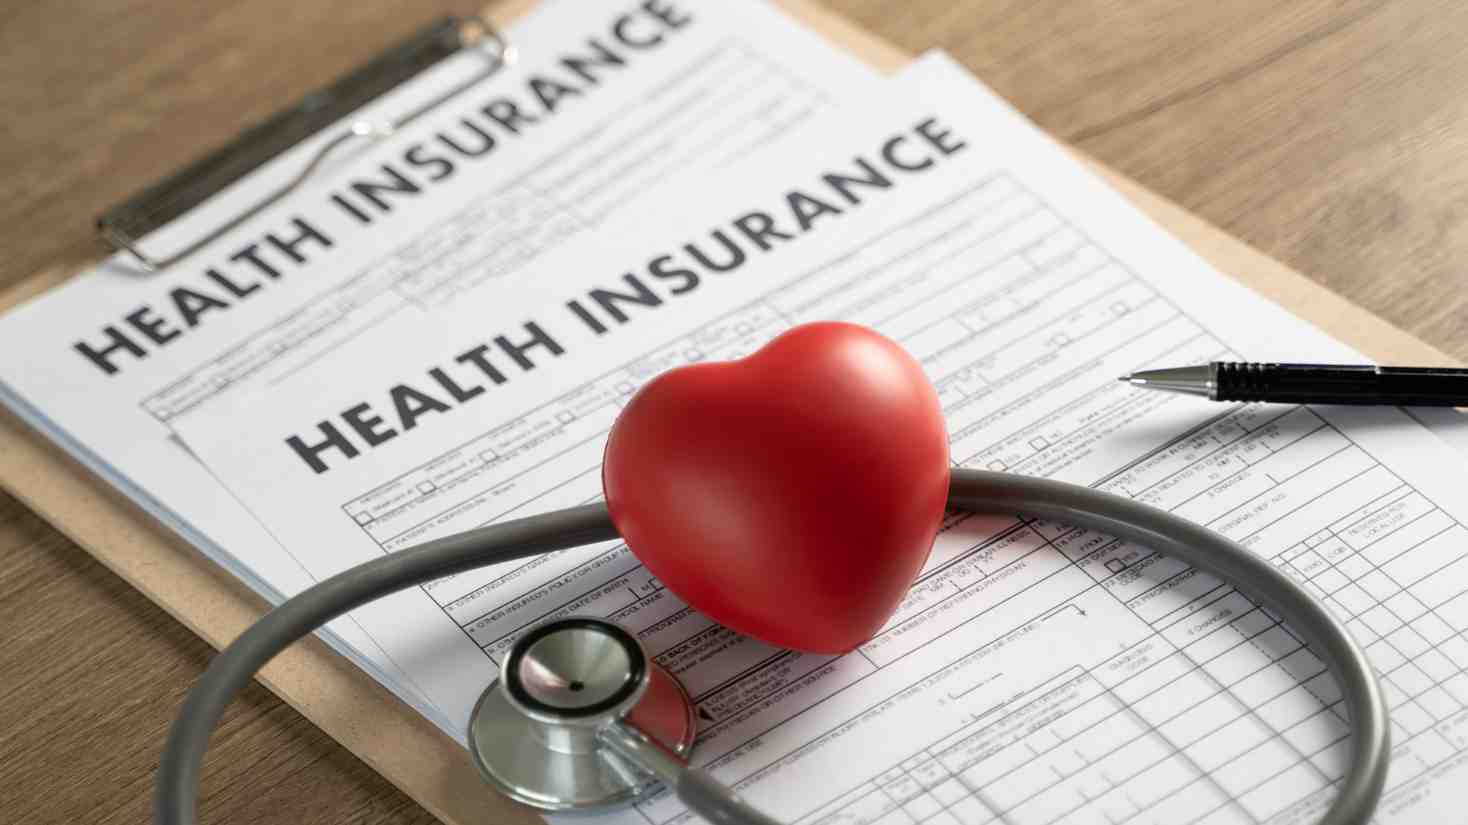 Health Insurance Premium: How Much Should I Pay?